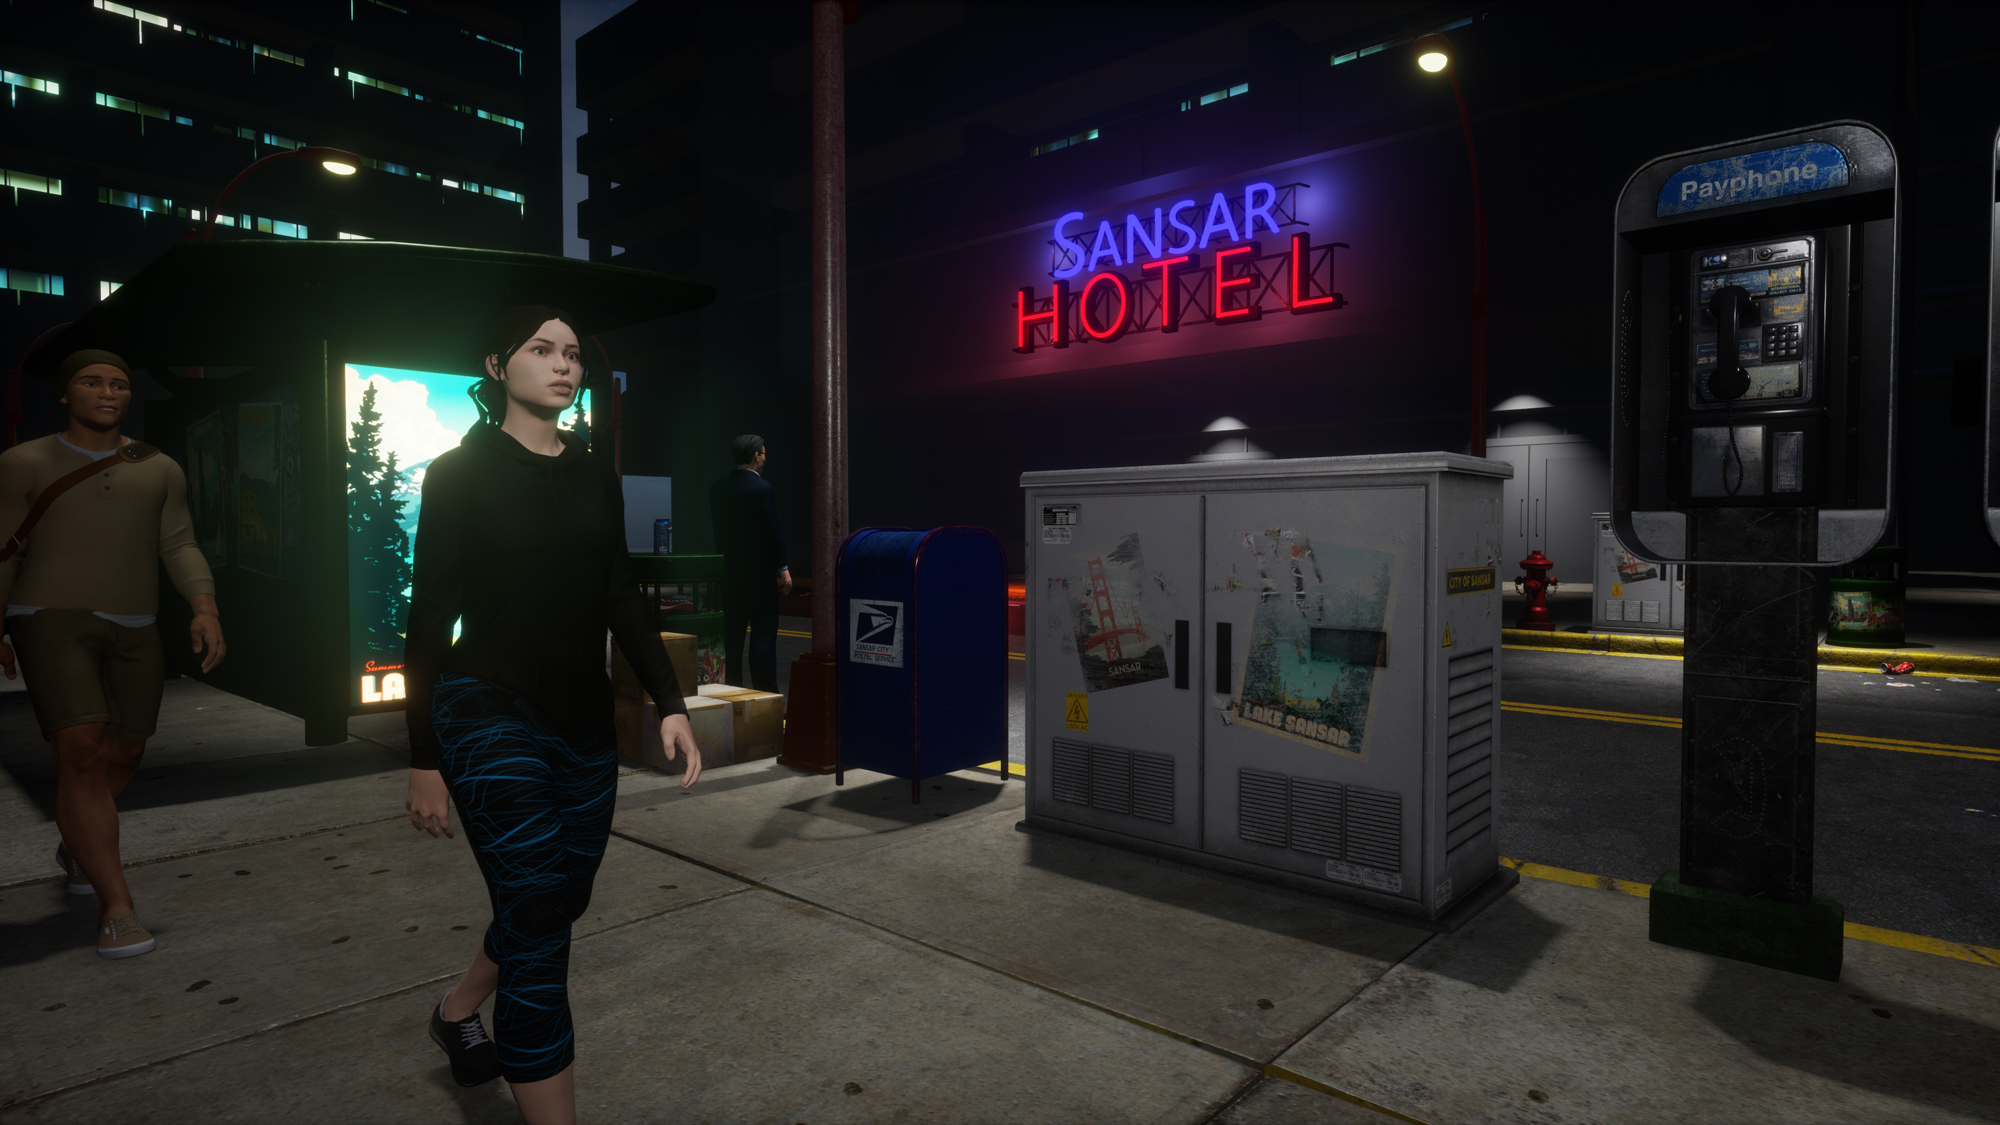 Linden Lab, the company behind the virtual world Second Life, is releasing a virtual-reality platform called Sansar this year that encourages users to interact with others and build their own experiences, too.